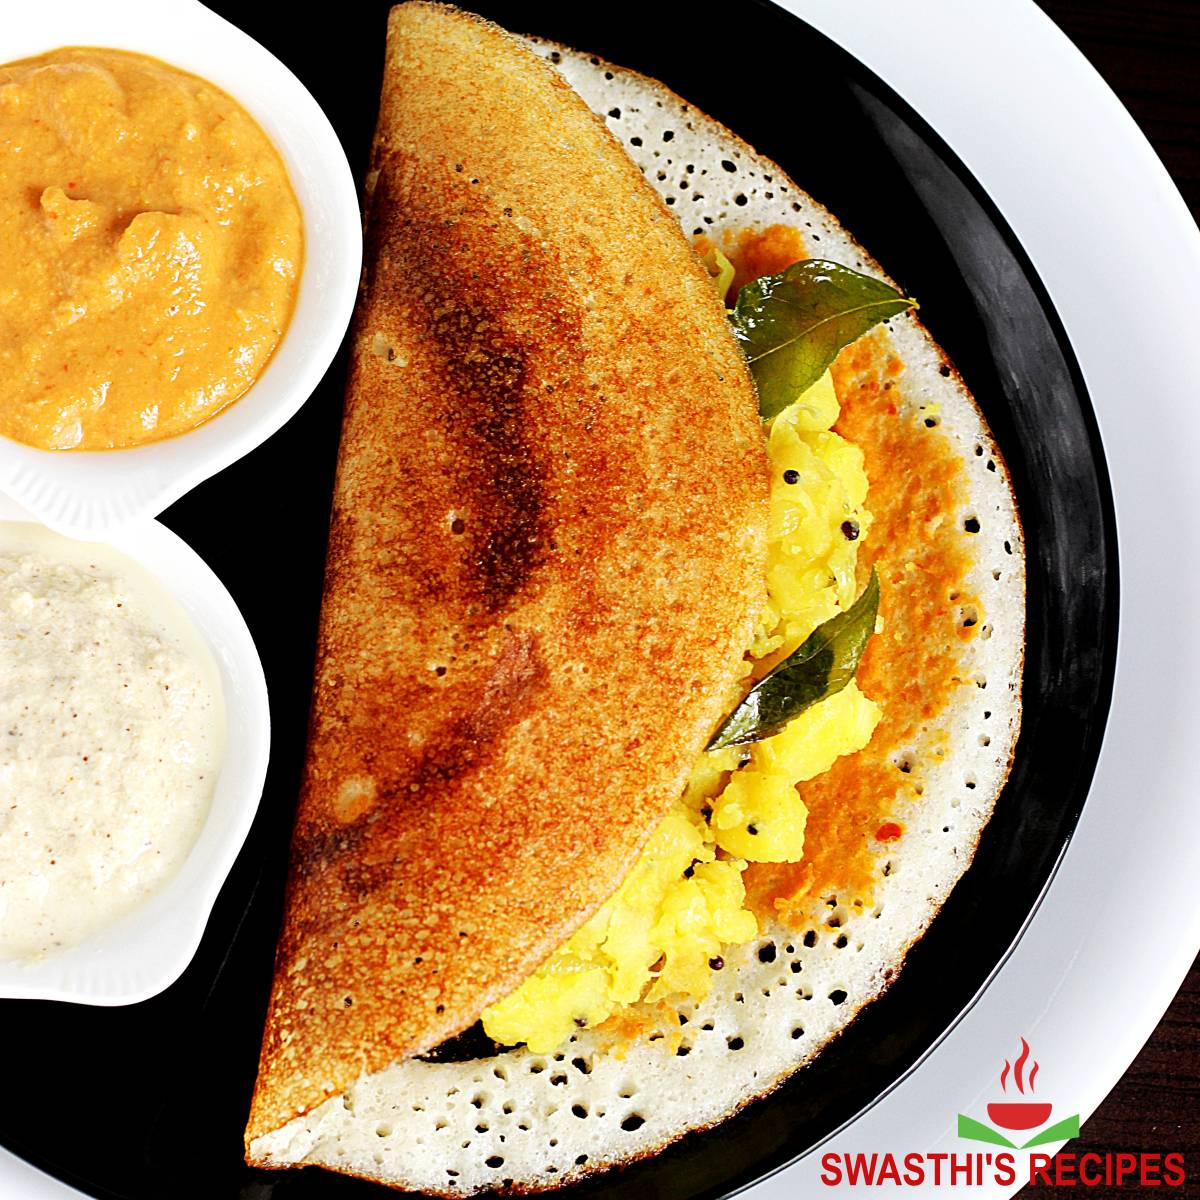 Best Dosa Tawas To Buy In 2023 - Top 5 Picks